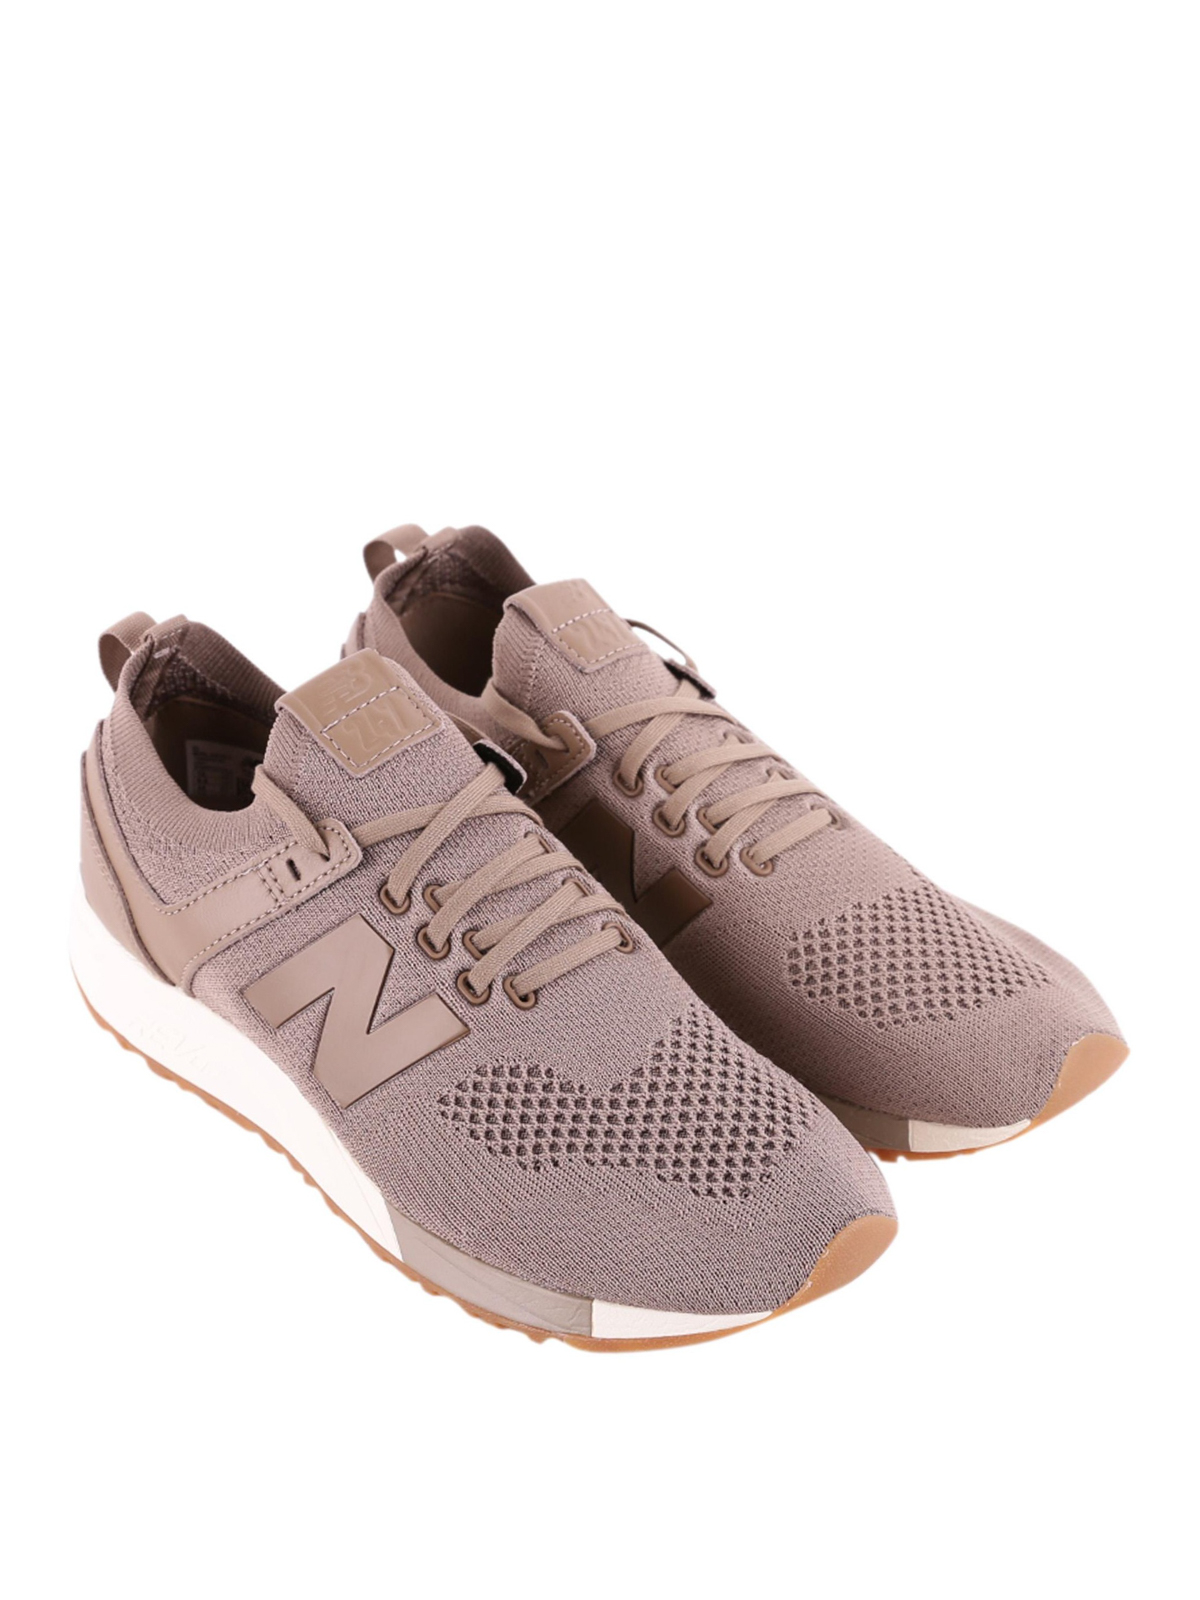 New Balance - 247 Decon taupe sneakers 